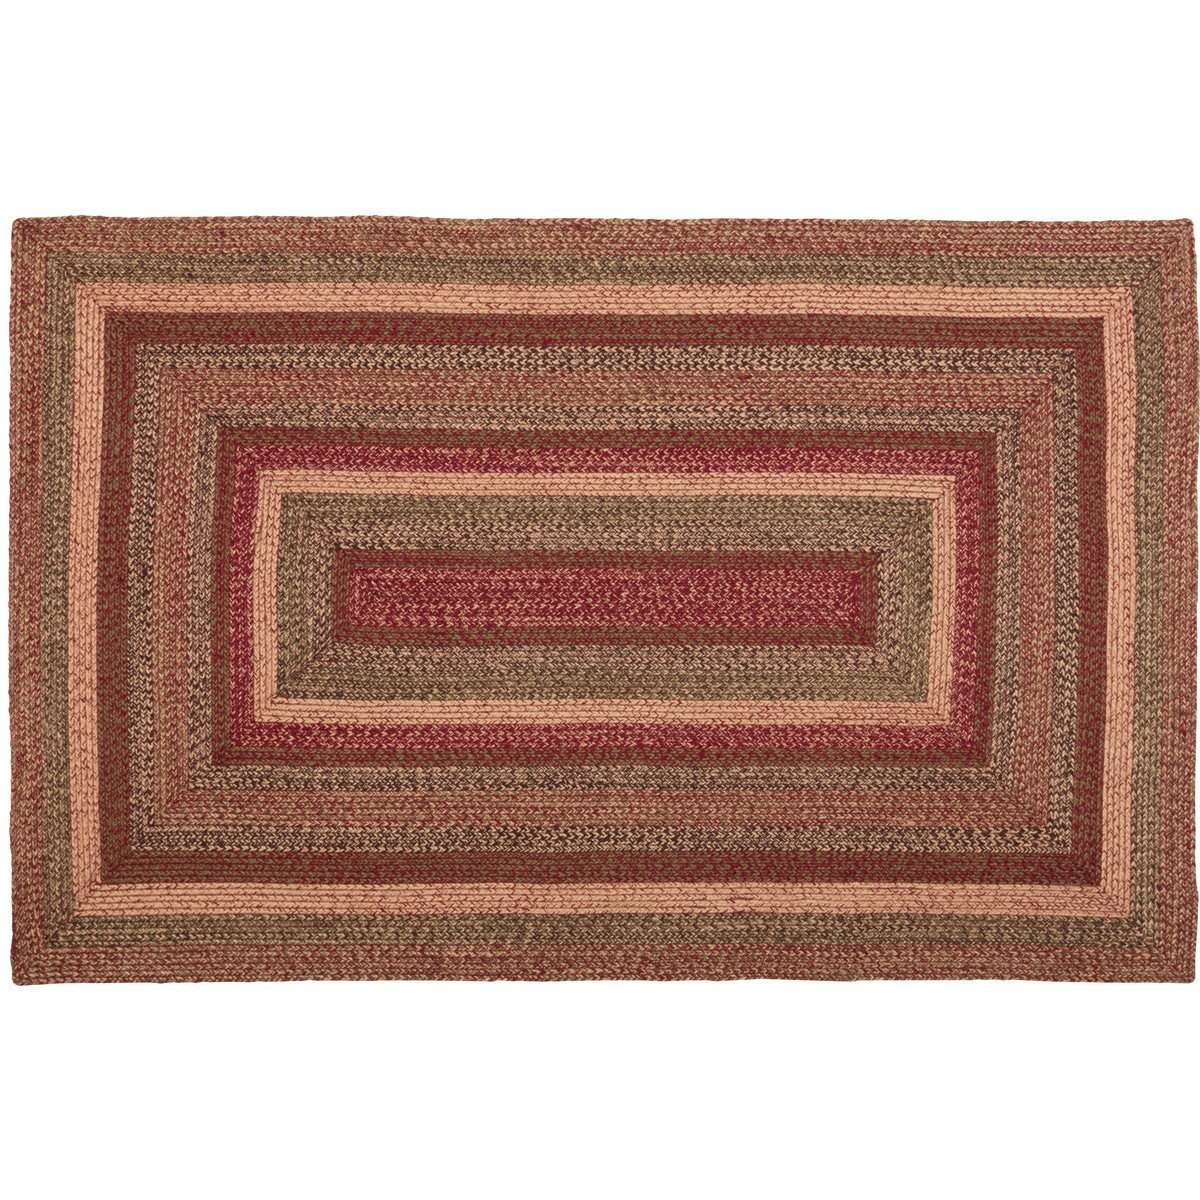 Cider Mill Jute Braided Rugs Rectangle VHC Brands Rugs VHC Brands 5'x8' 